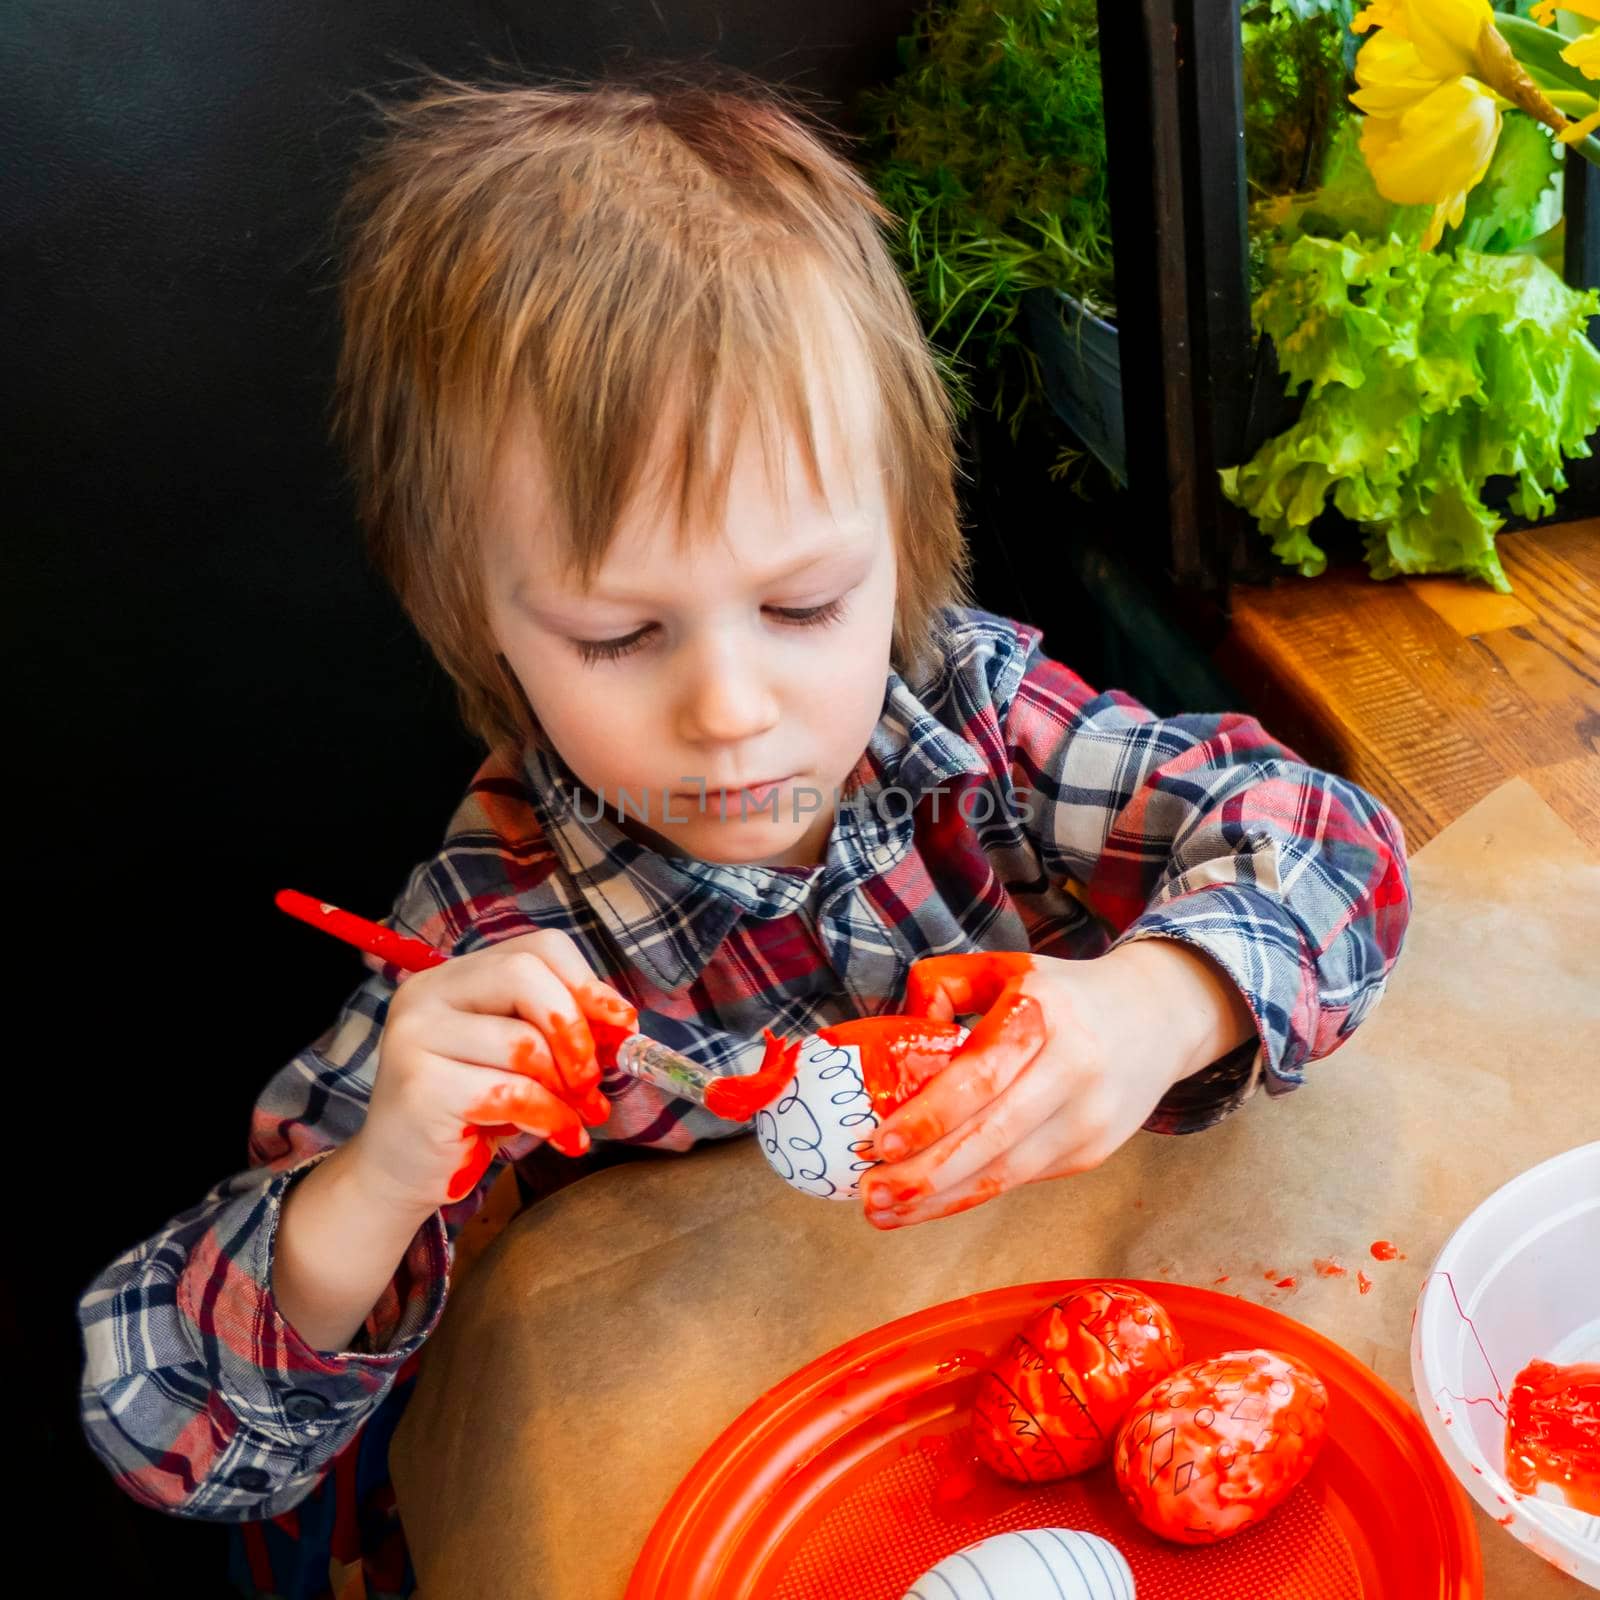 funny kid in a red plaid blouse paints artificial Easter eggs red on a wooden table among fresh greenery. preparation for the bright Easter holiday